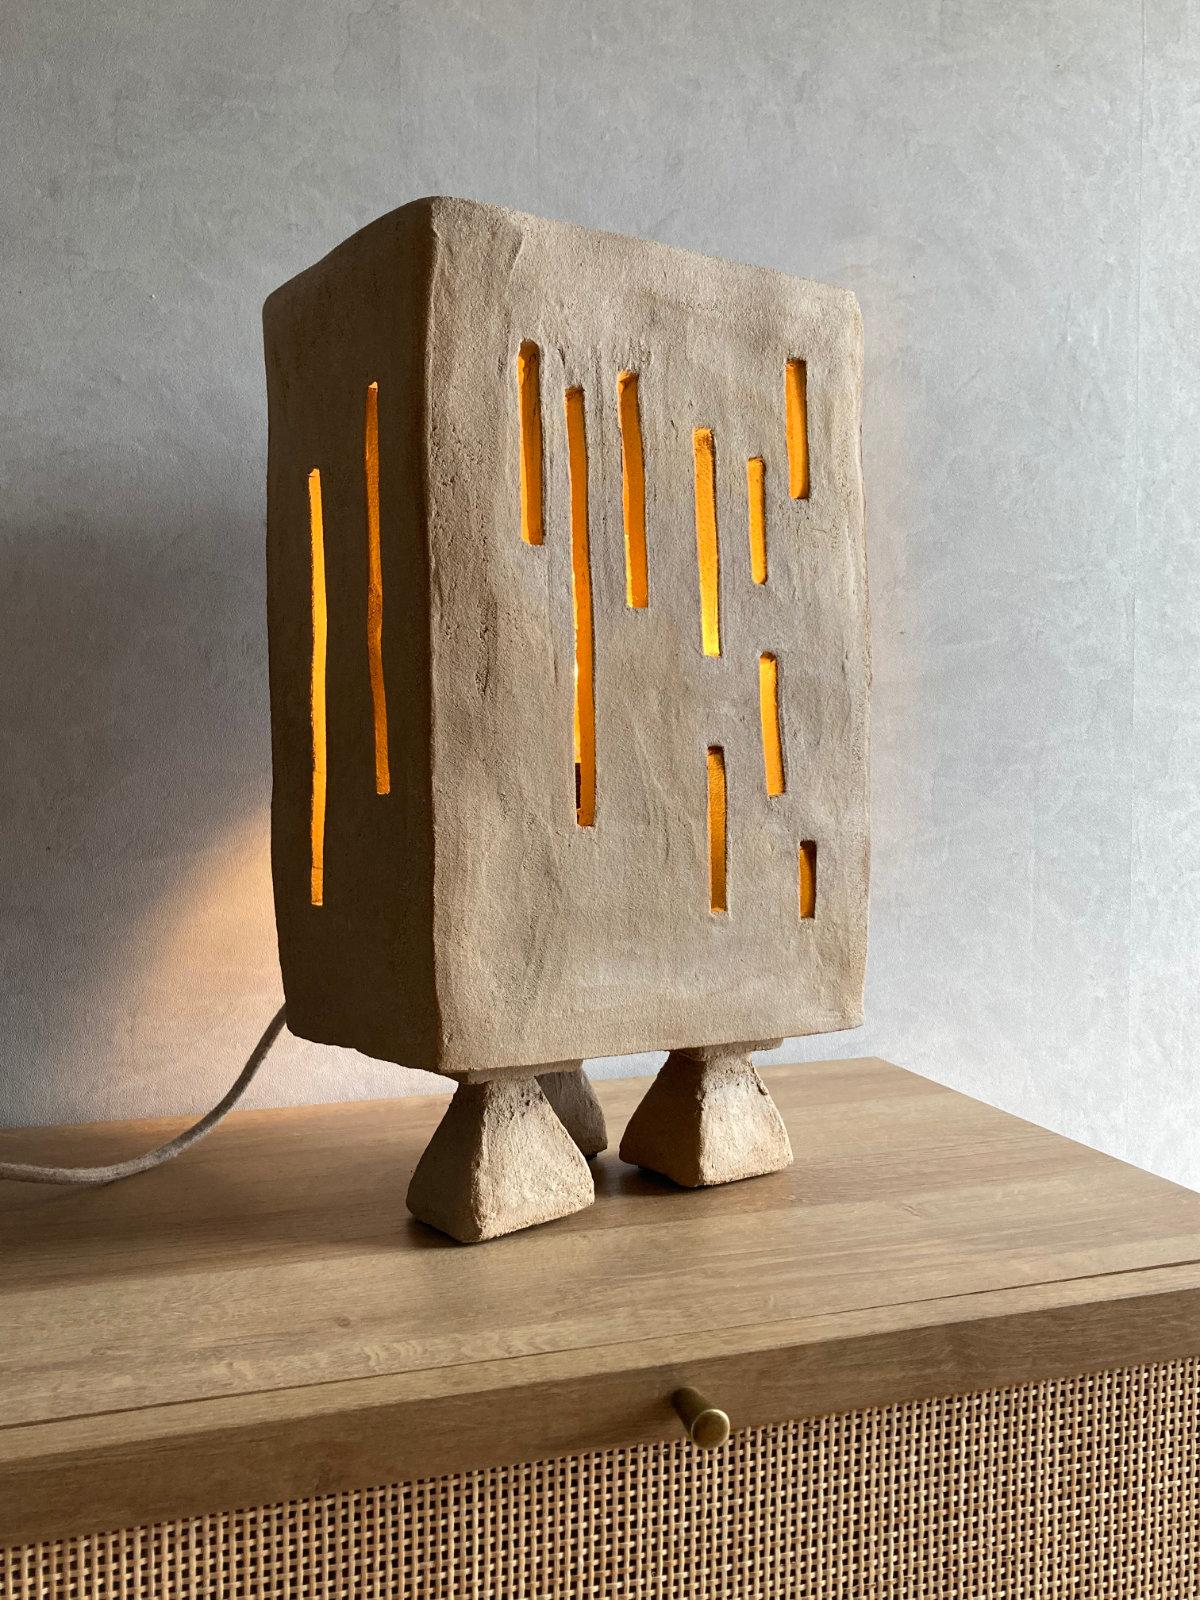 Artefact table lamp by Lea Munsch
Dimensions: W 28 x D 16 x H 49 cm
Materials: Stoneware

Numbered on /20. Each piece is unique with its own personality and marks. There is an opening on the back to slide in a lightbulb.

Sand. As far as the